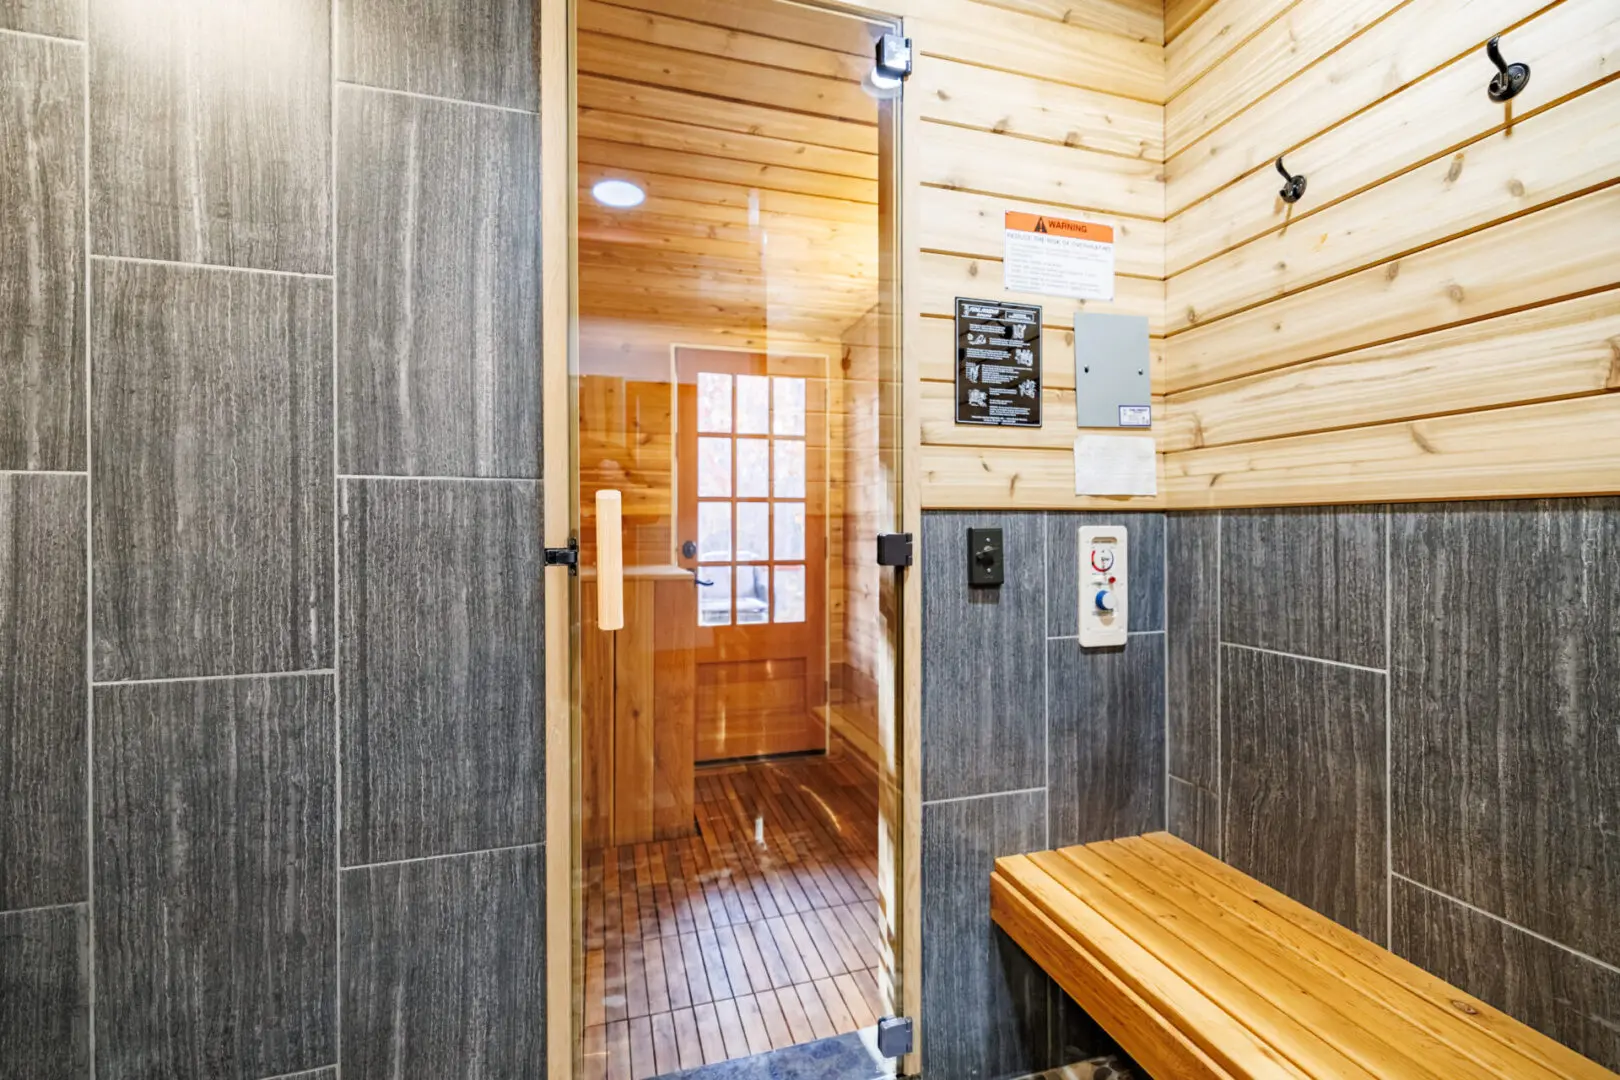 Little River Point offers a serene sauna experience, with a wooden bench and a glass door providing an inviting ambiance.